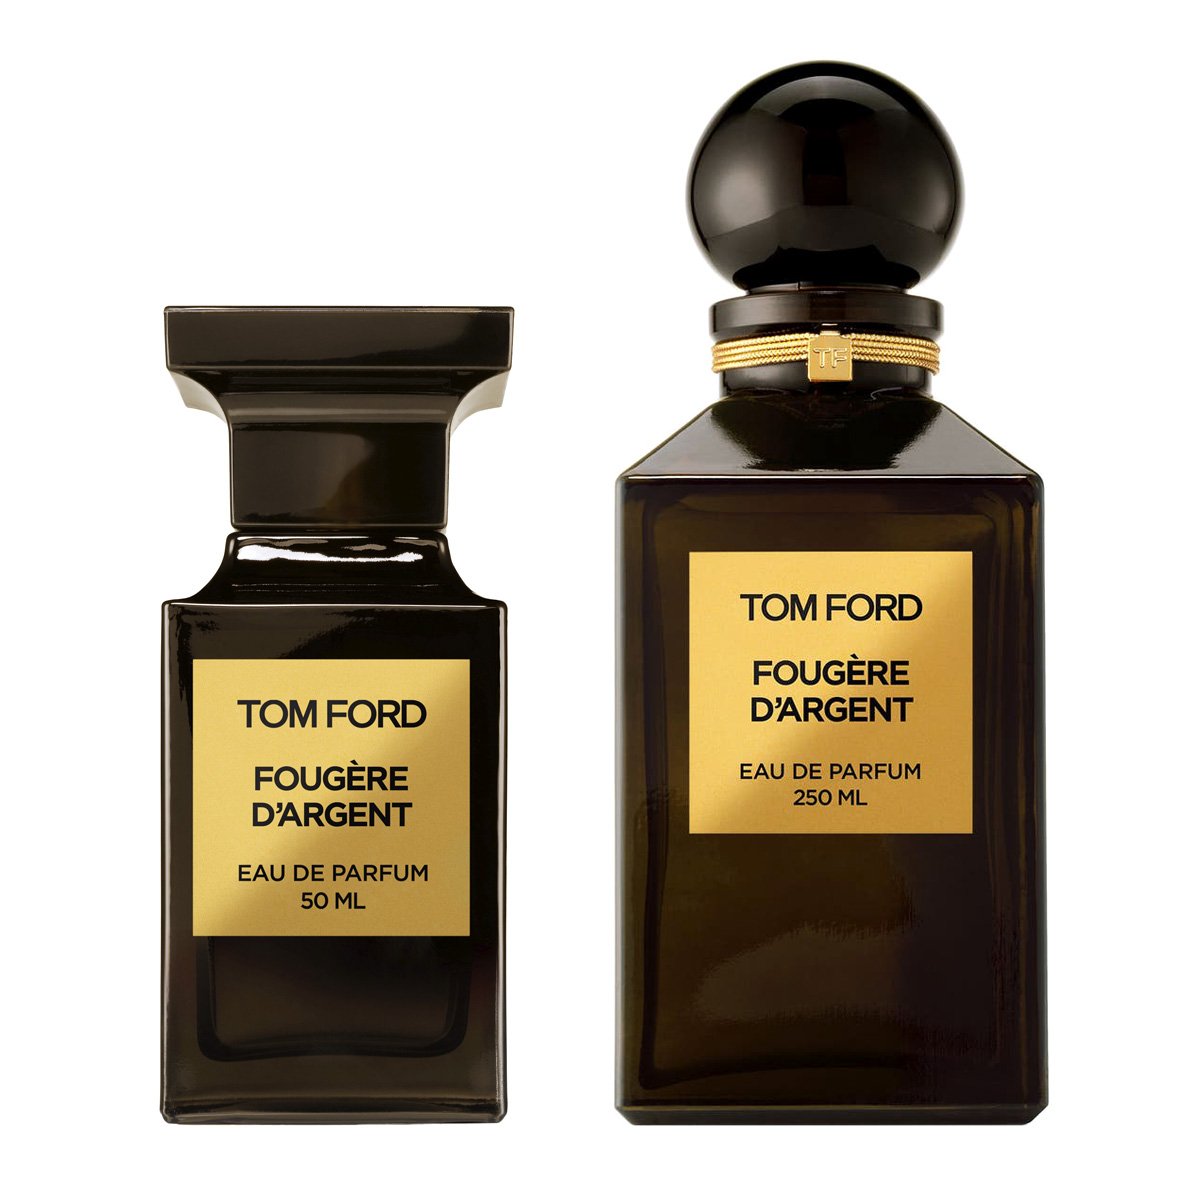 Сколько стоит оригинал духов том форд. Tom Ford Fougere d'argent. Духи Tom Ford Fougere. Парфюмерная вода Tom Ford private Blend Fougere d'argent 50. Том Форд фужер Даргент.